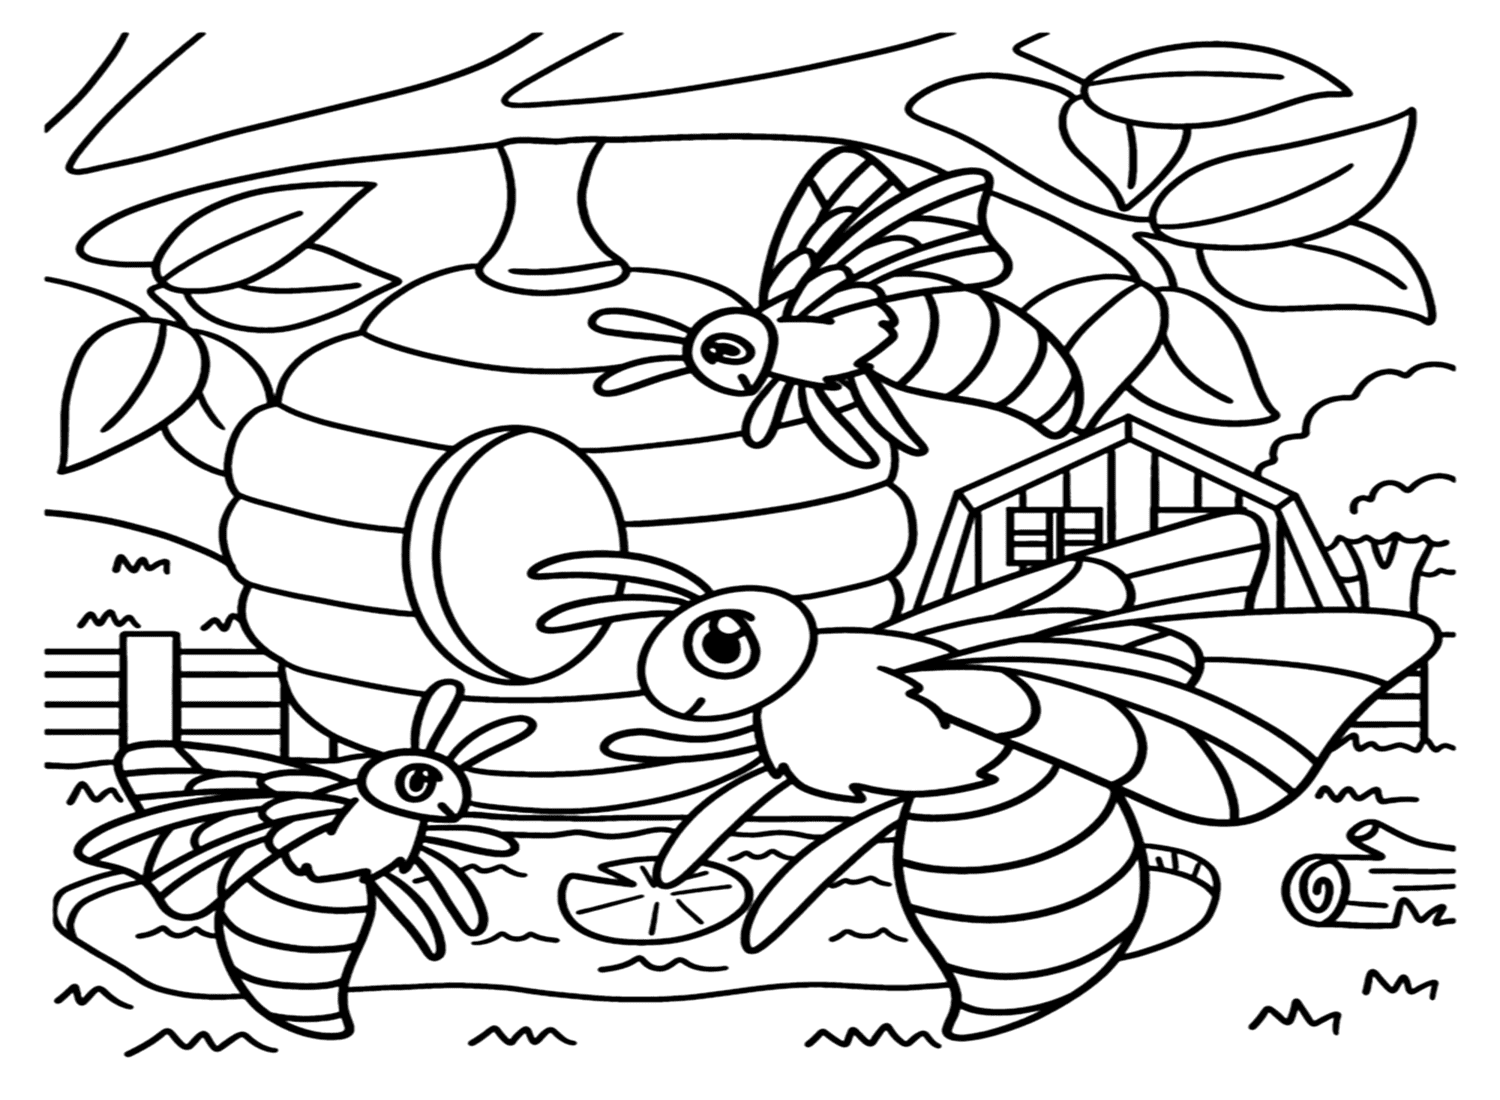 Wasp Nest Coloring Page from Wasp